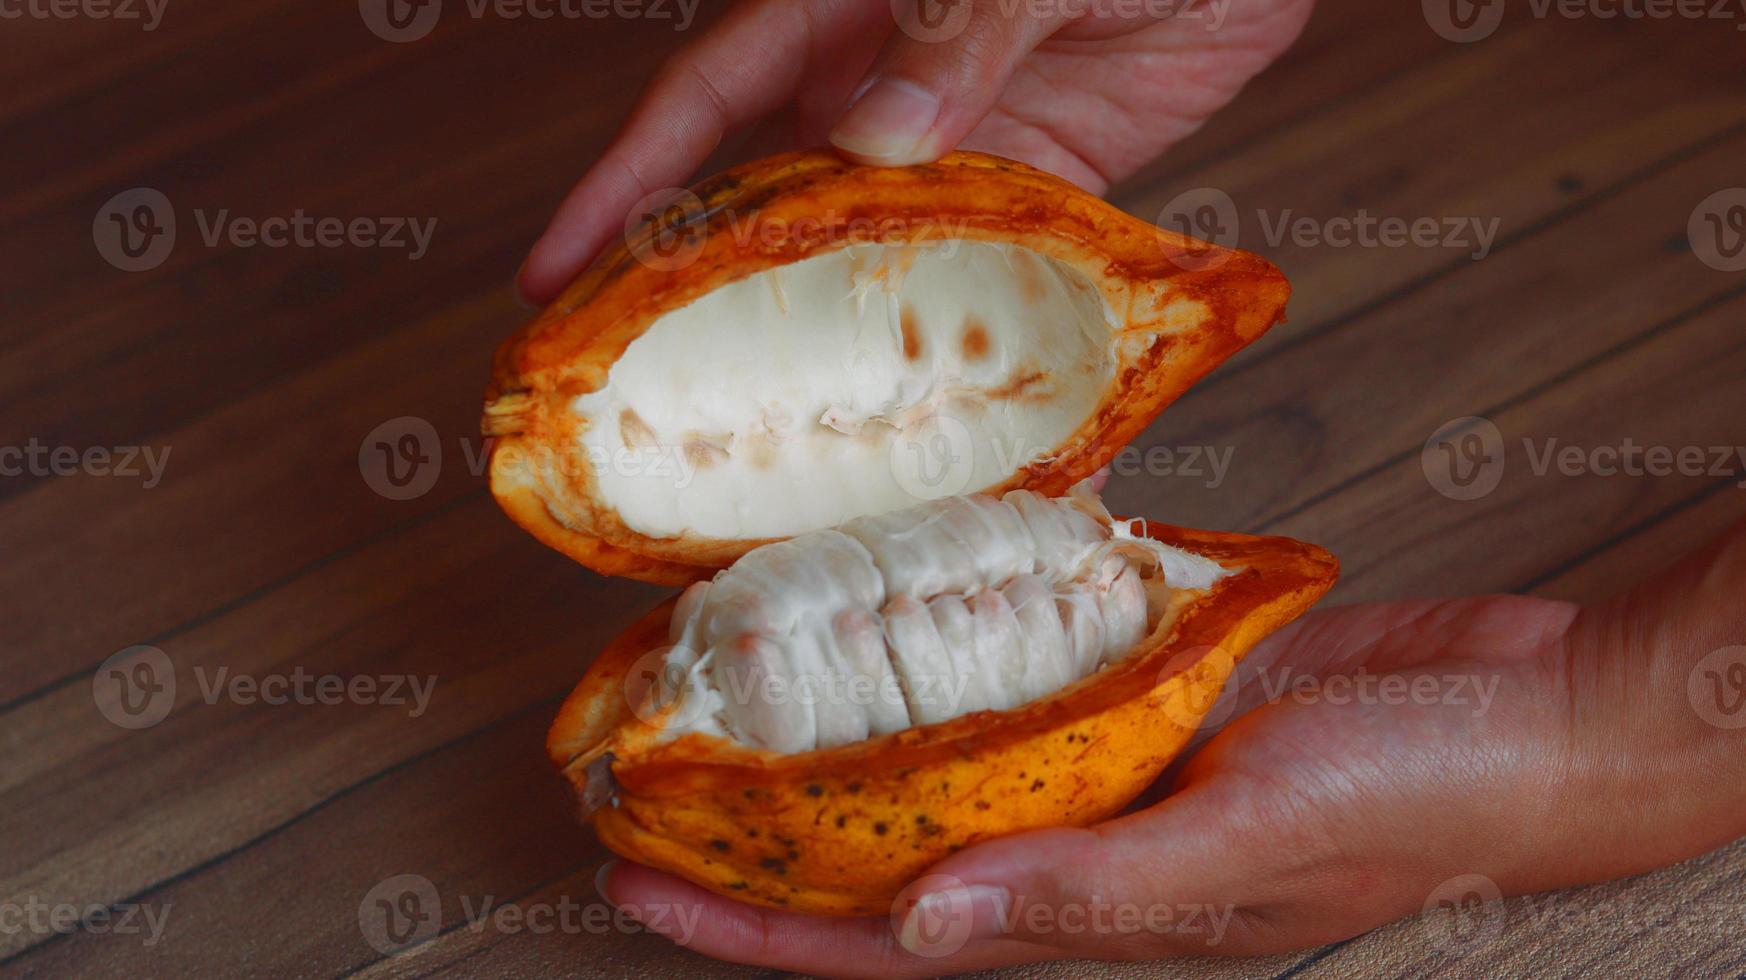 ripe and hand held cocoa pods. cacao pod harvesting and open. split fruit. photo